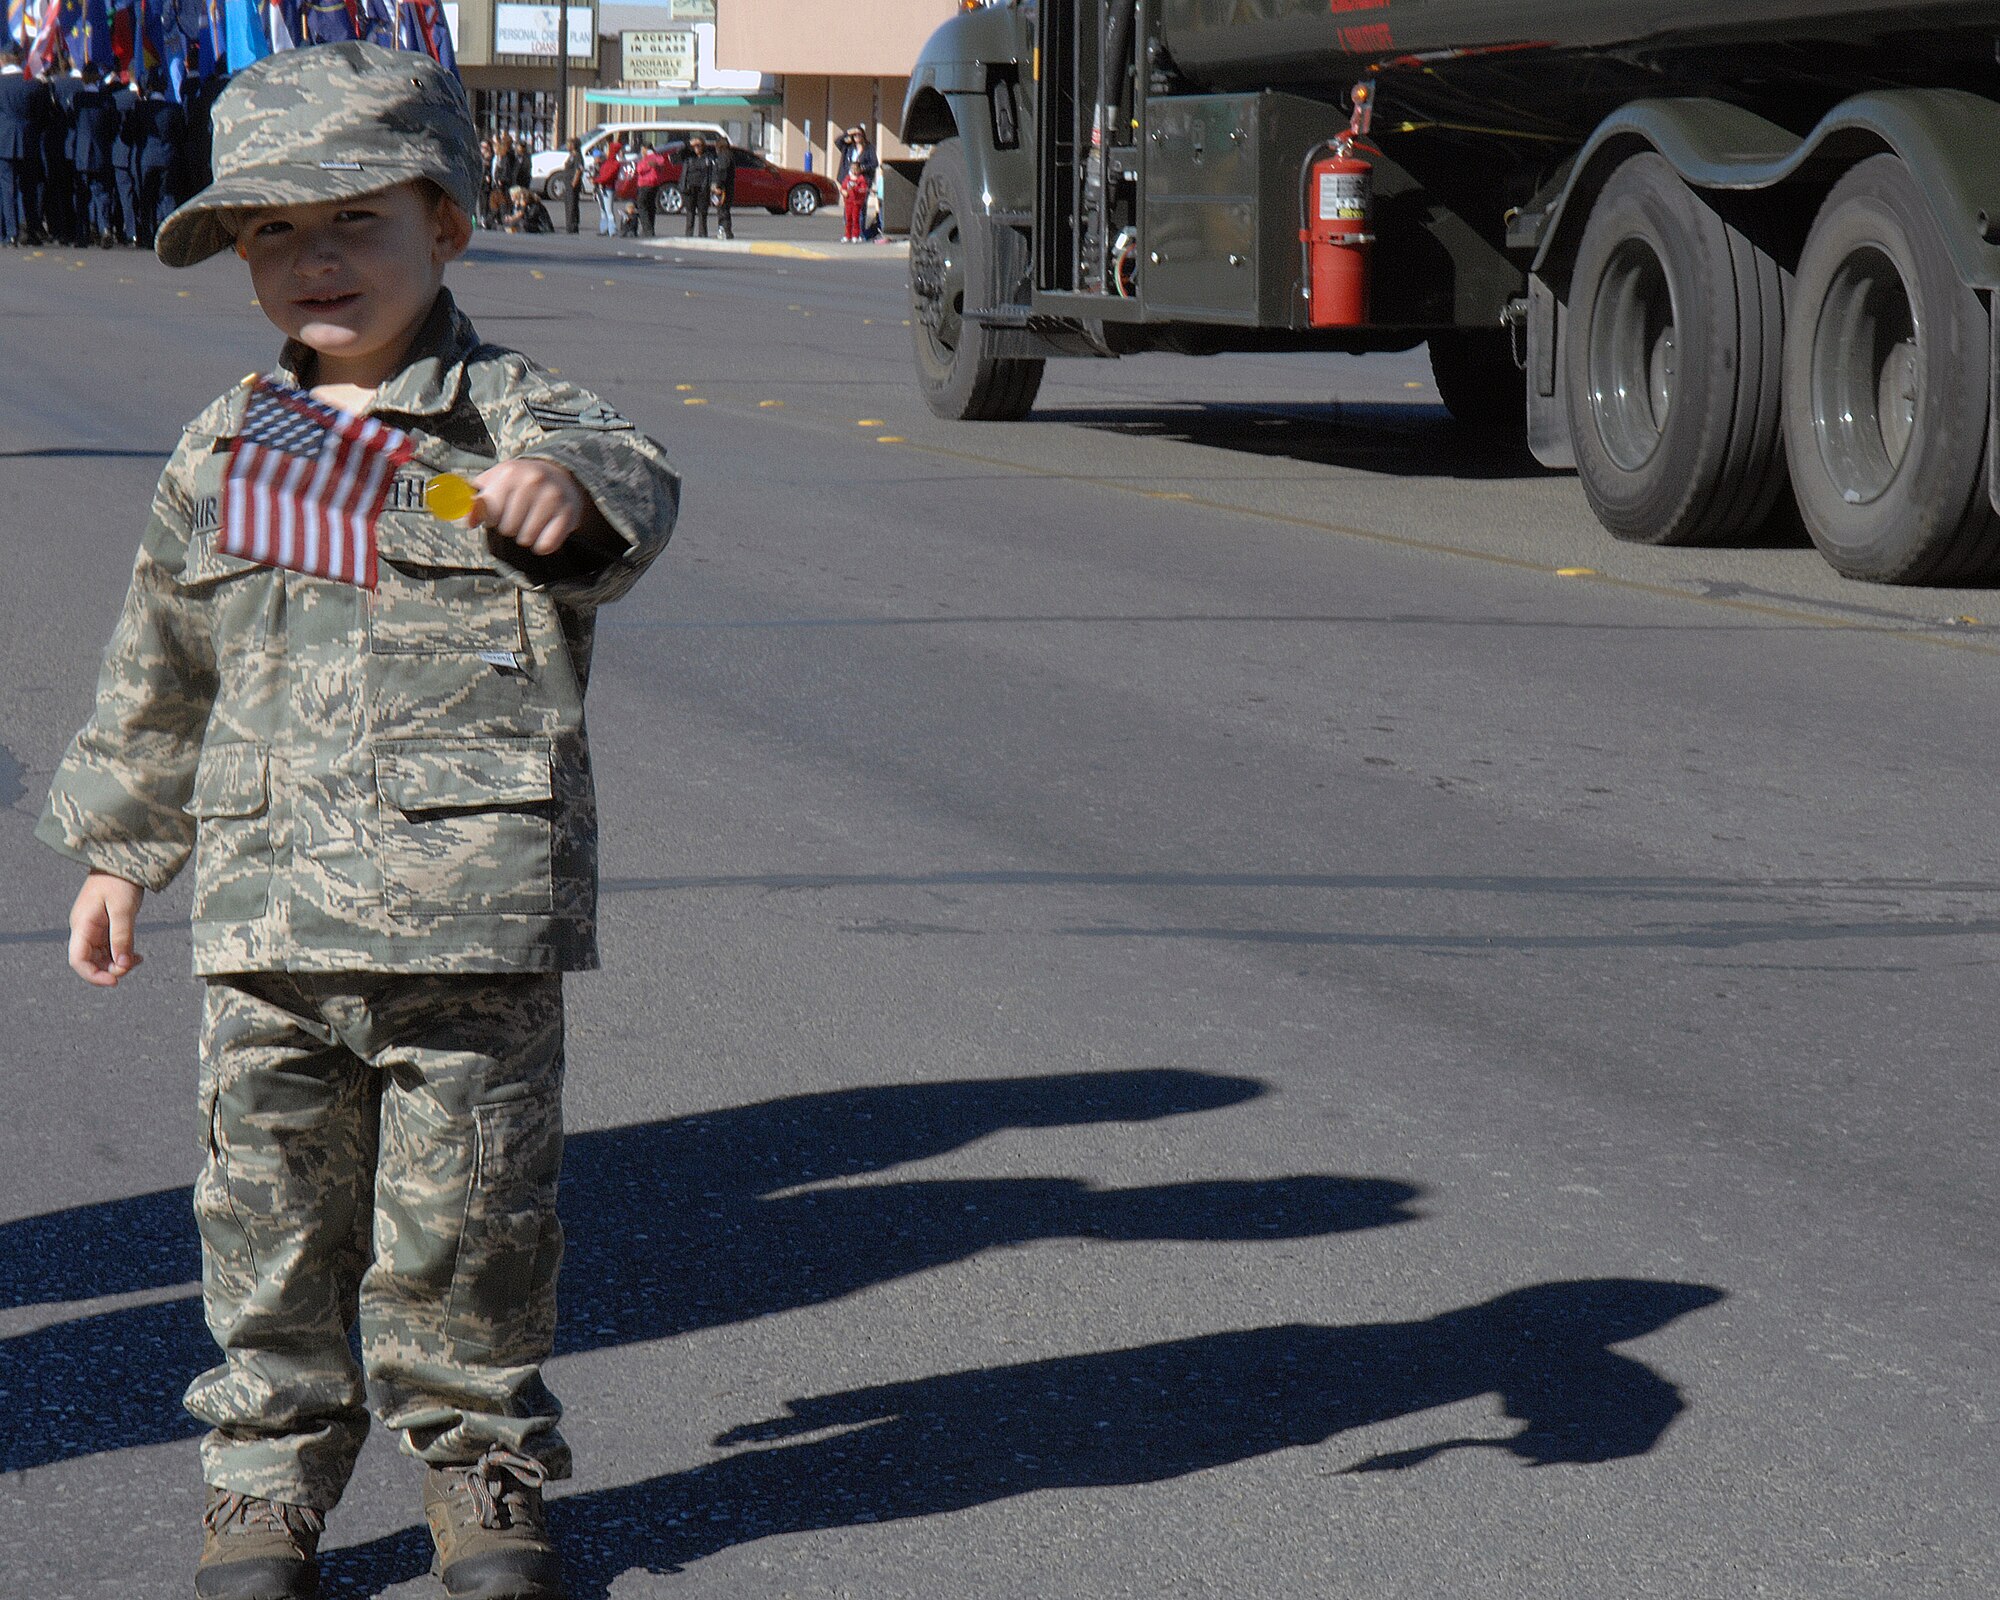 Staff Sgt. David Thomas's son, Antonio, shows his patriotism by waving his American flag during the Veterans Day parade, Nov. 8, in Alamogordo, N.M. The Veterans Day National Ceremony is held Nov. 11 each year at Arlington National Cemetery.



(U.S. Air Force photo/ Senior Airman Anthony Nelson)
